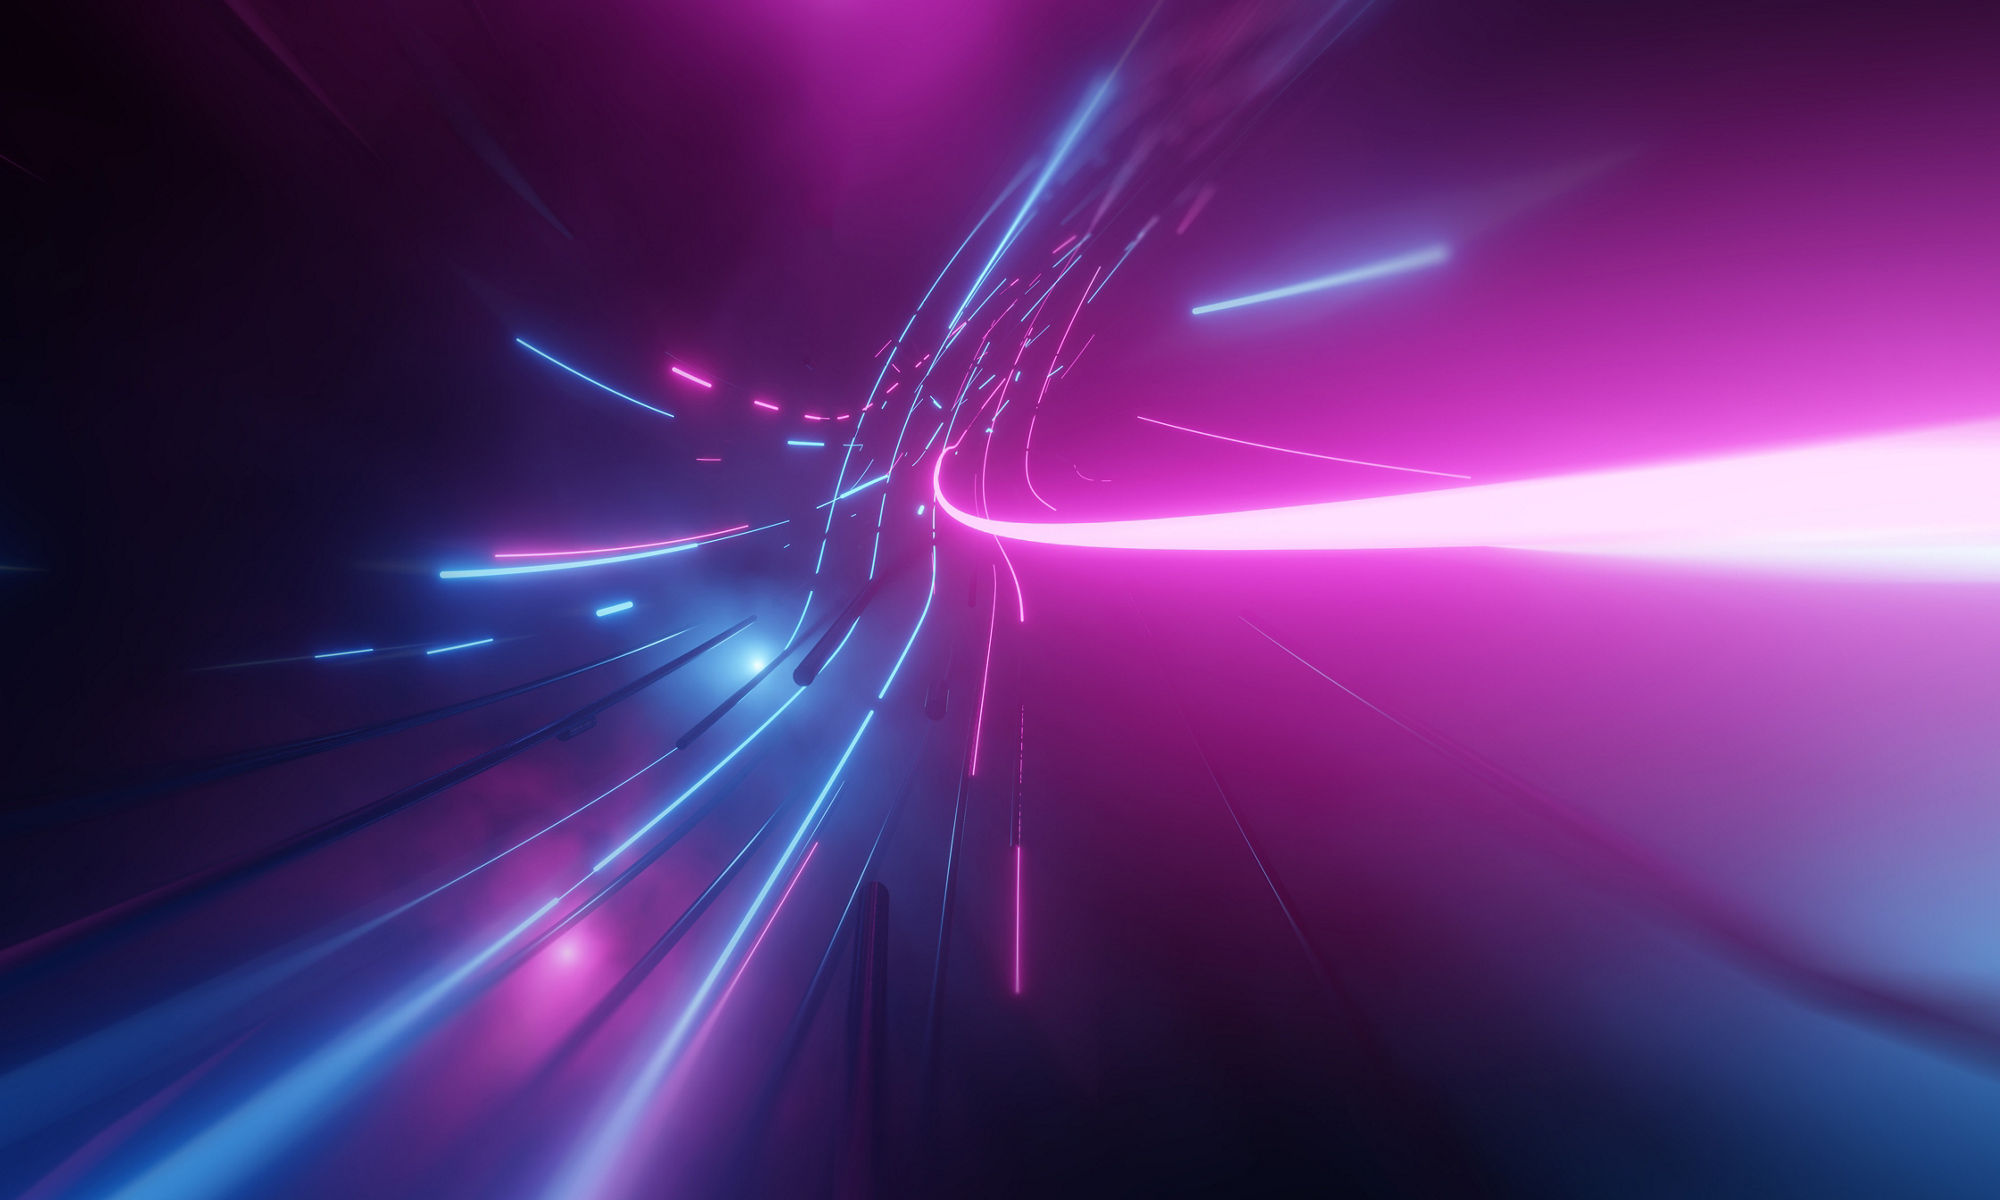 Abstract neon pink and bright blue lights suggesting movement